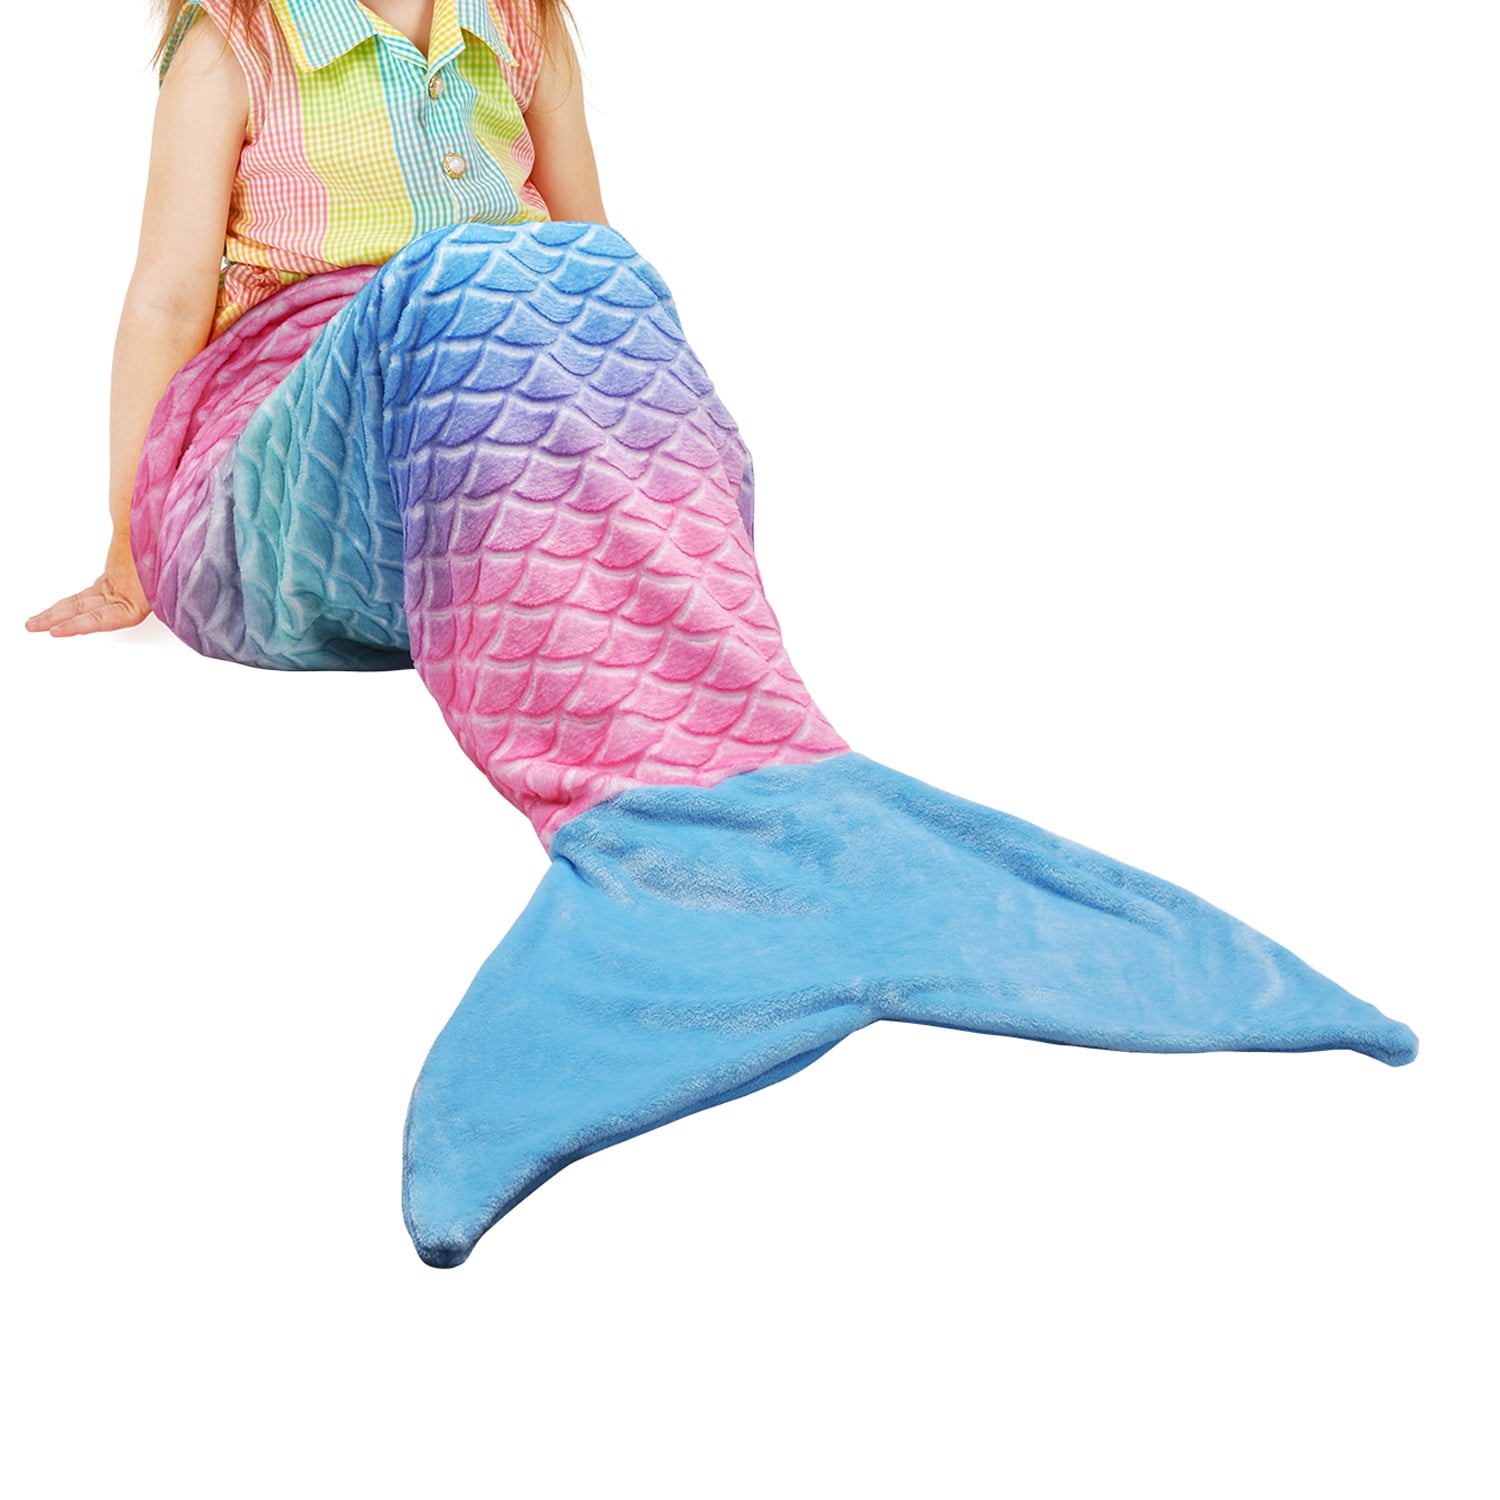 Fleece Blankets Fluffy Fleece Throw Blankets Warm Soft Space Throw Blankets for Couch Sofa Quilt Cozy Travel Camper Gift 50x40Mermaid Tail Scales 